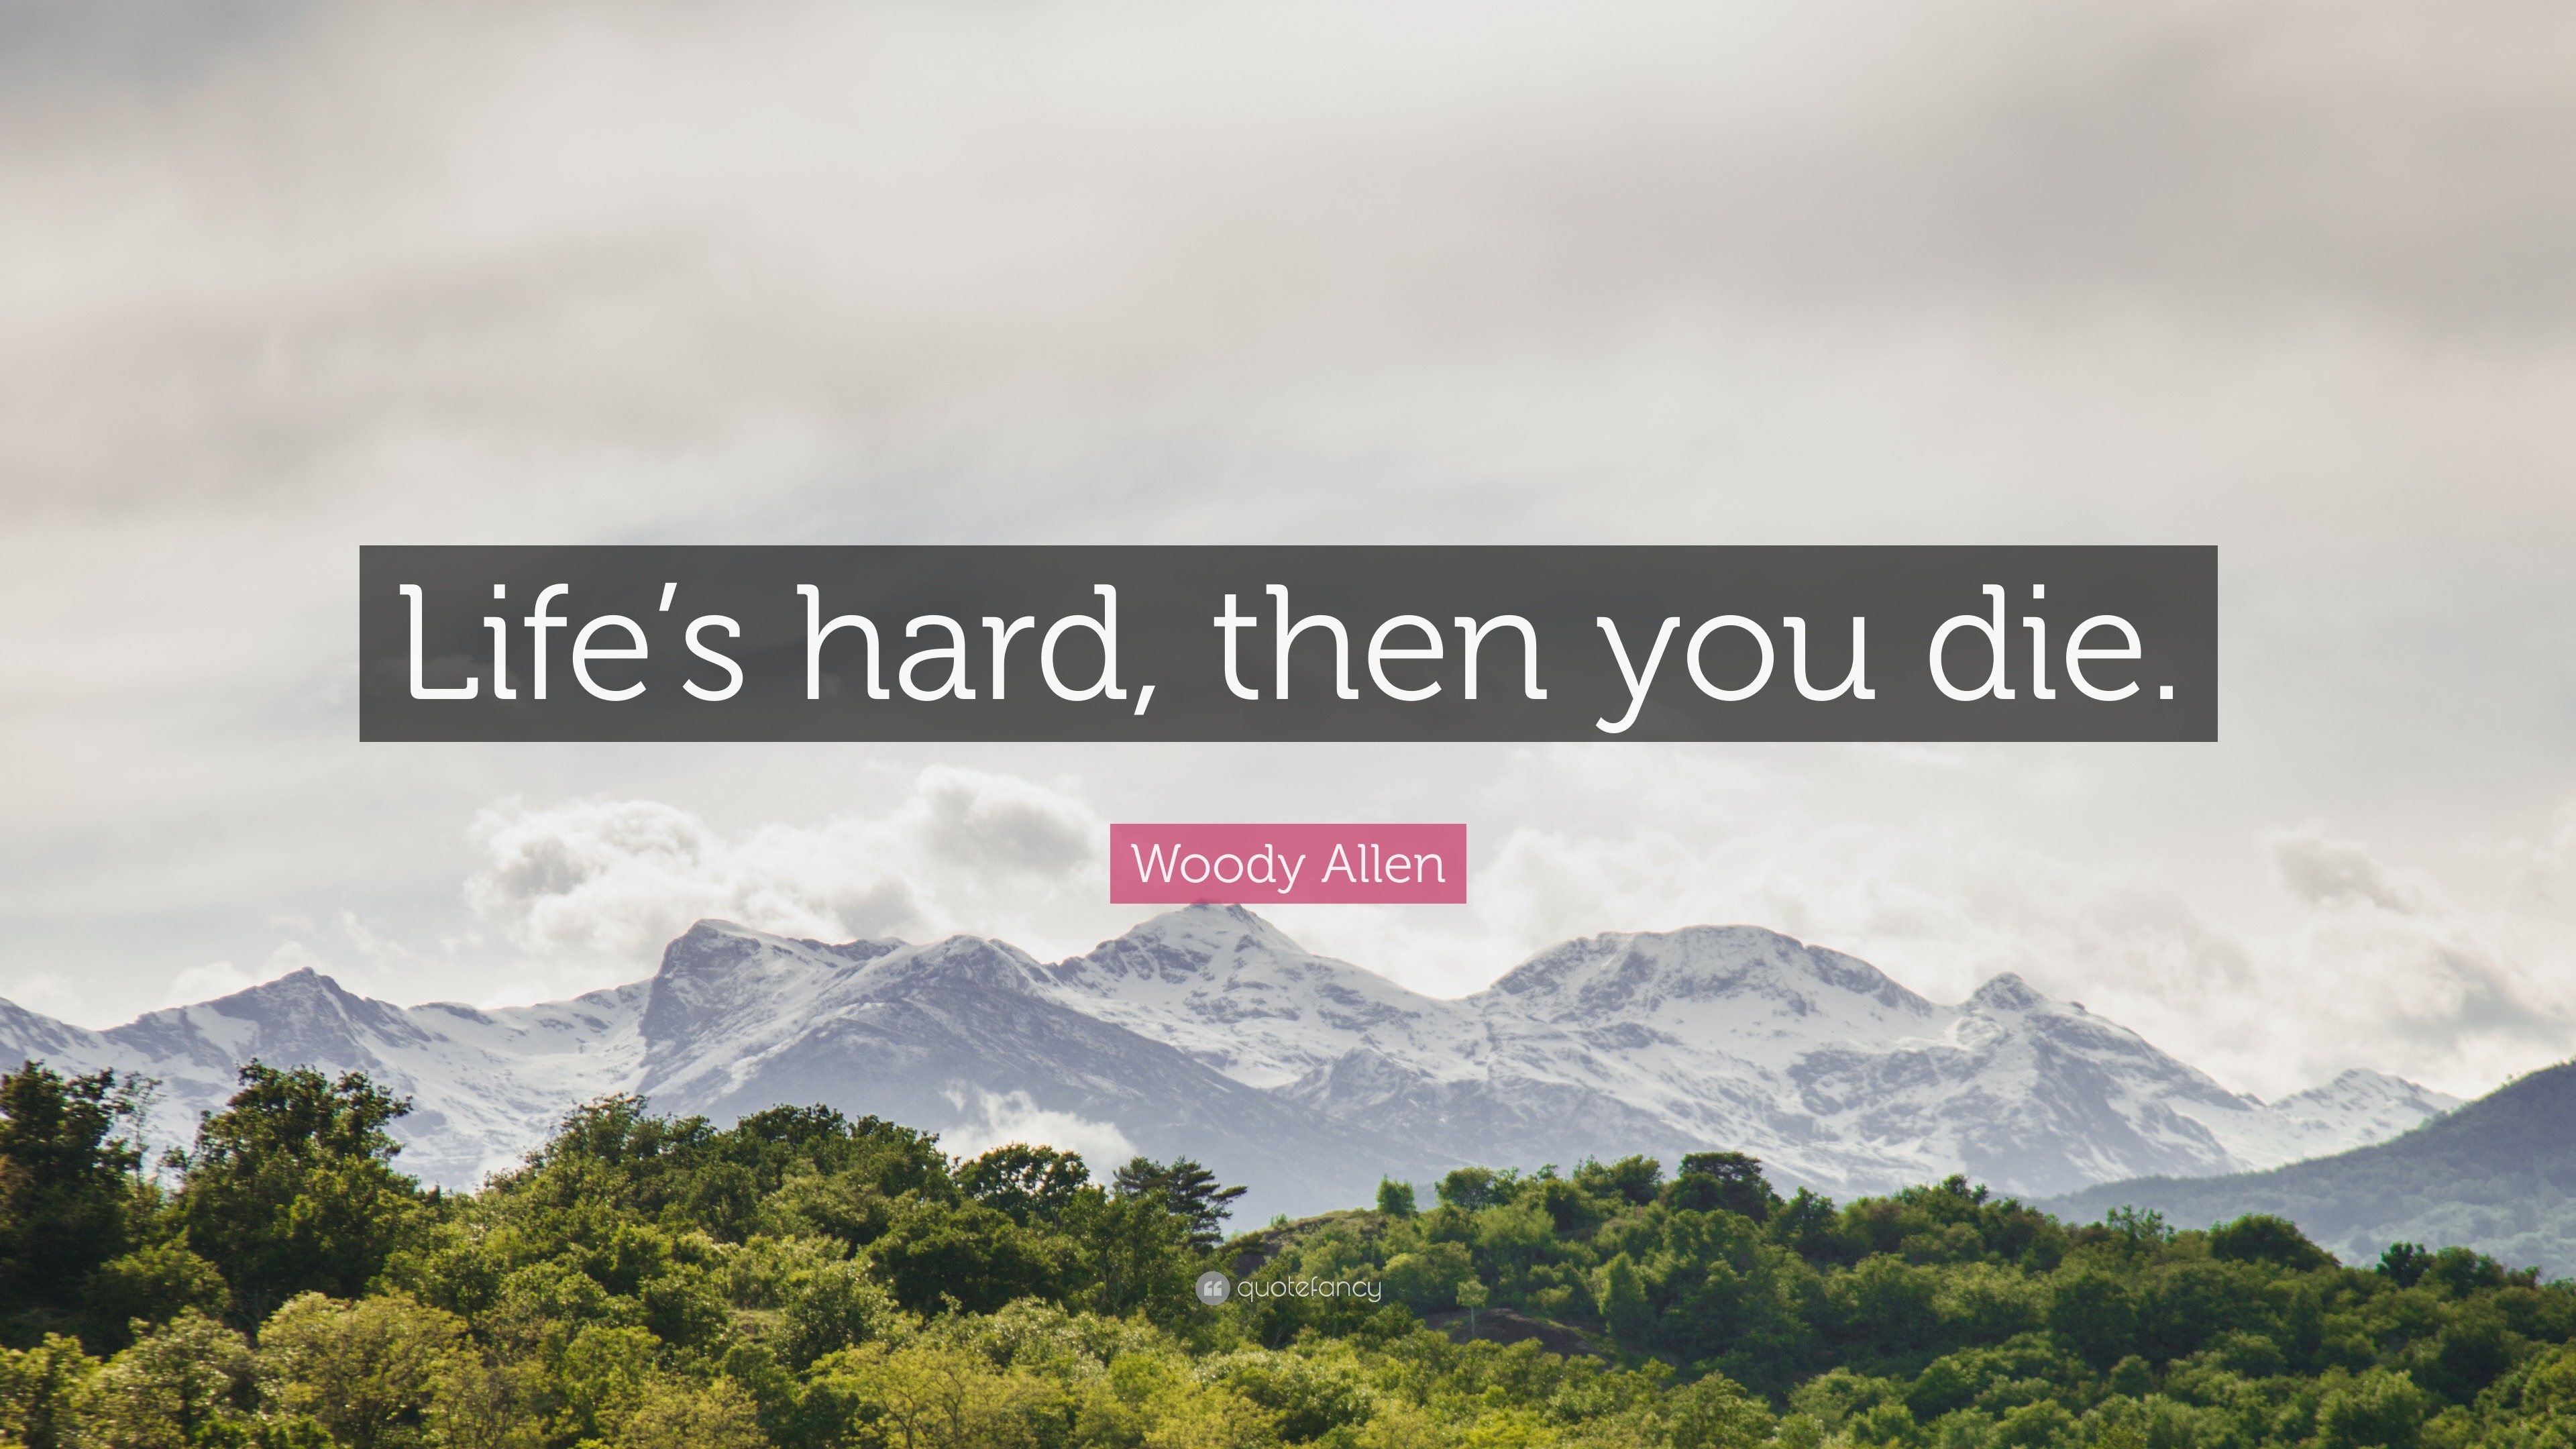 Woody Allen Quote “Life s hard then you ”